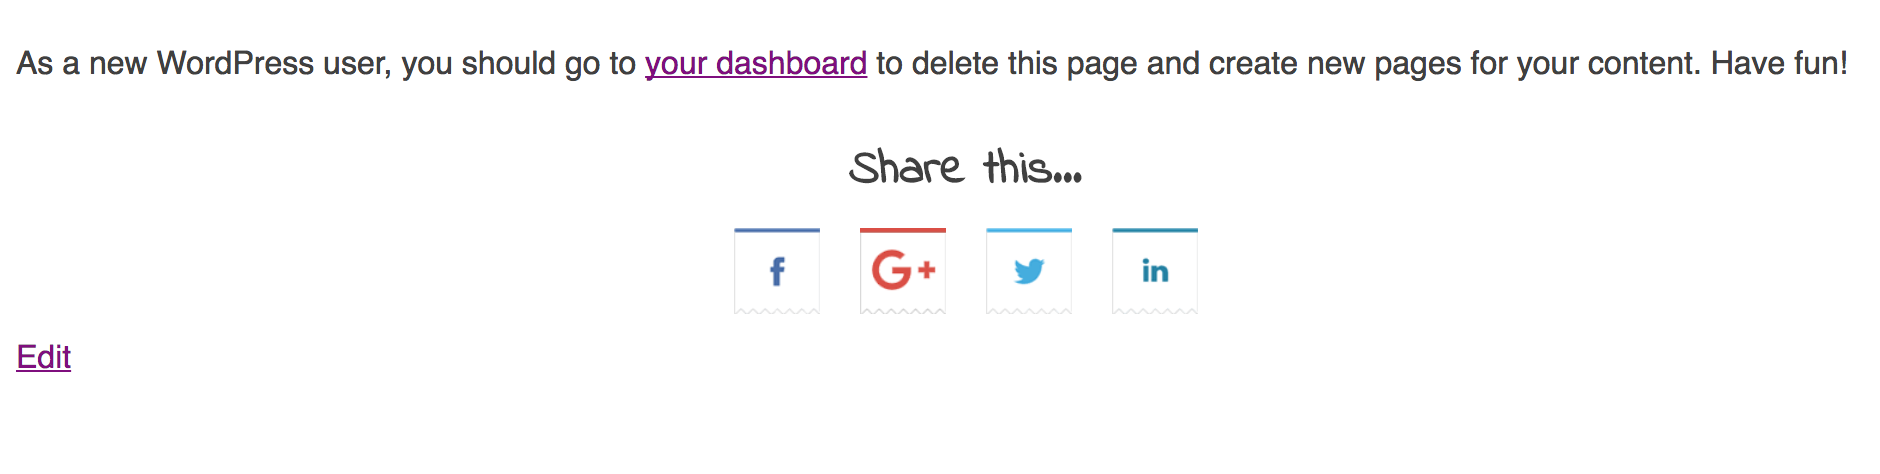 An example of the buttons shown below page content using the "Ribbon" theme.